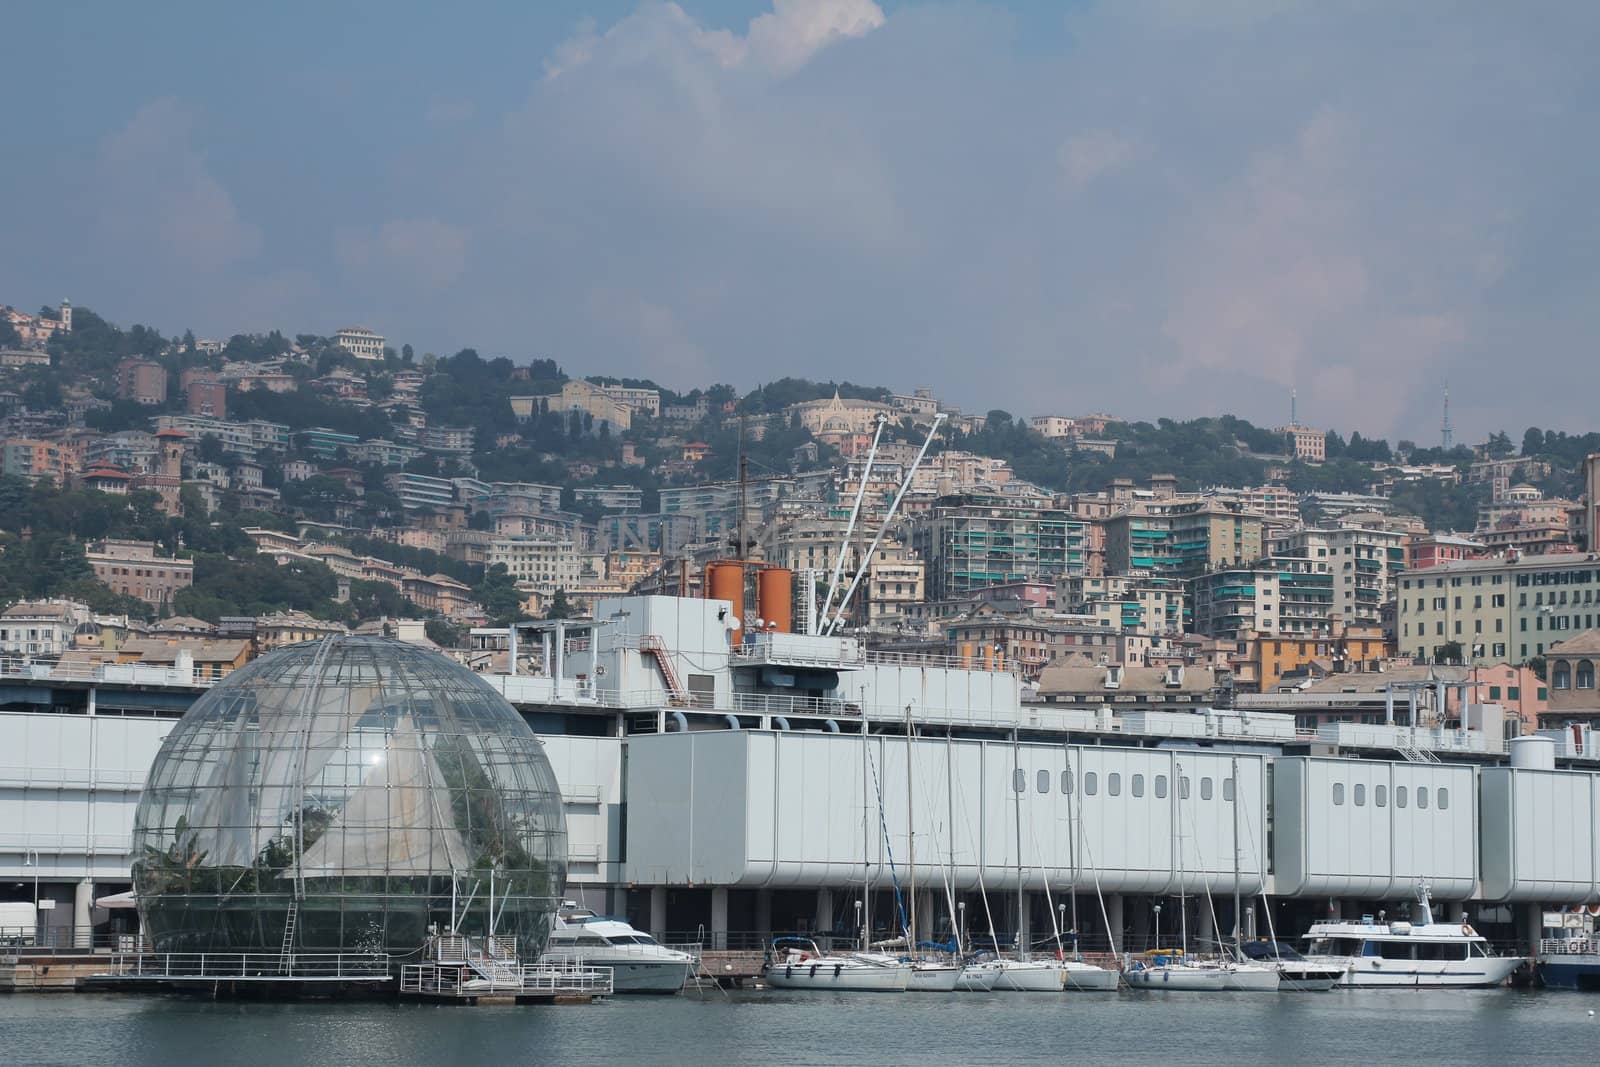 The aquarium and the sphere of Renzo Piano in the port of Genoa
